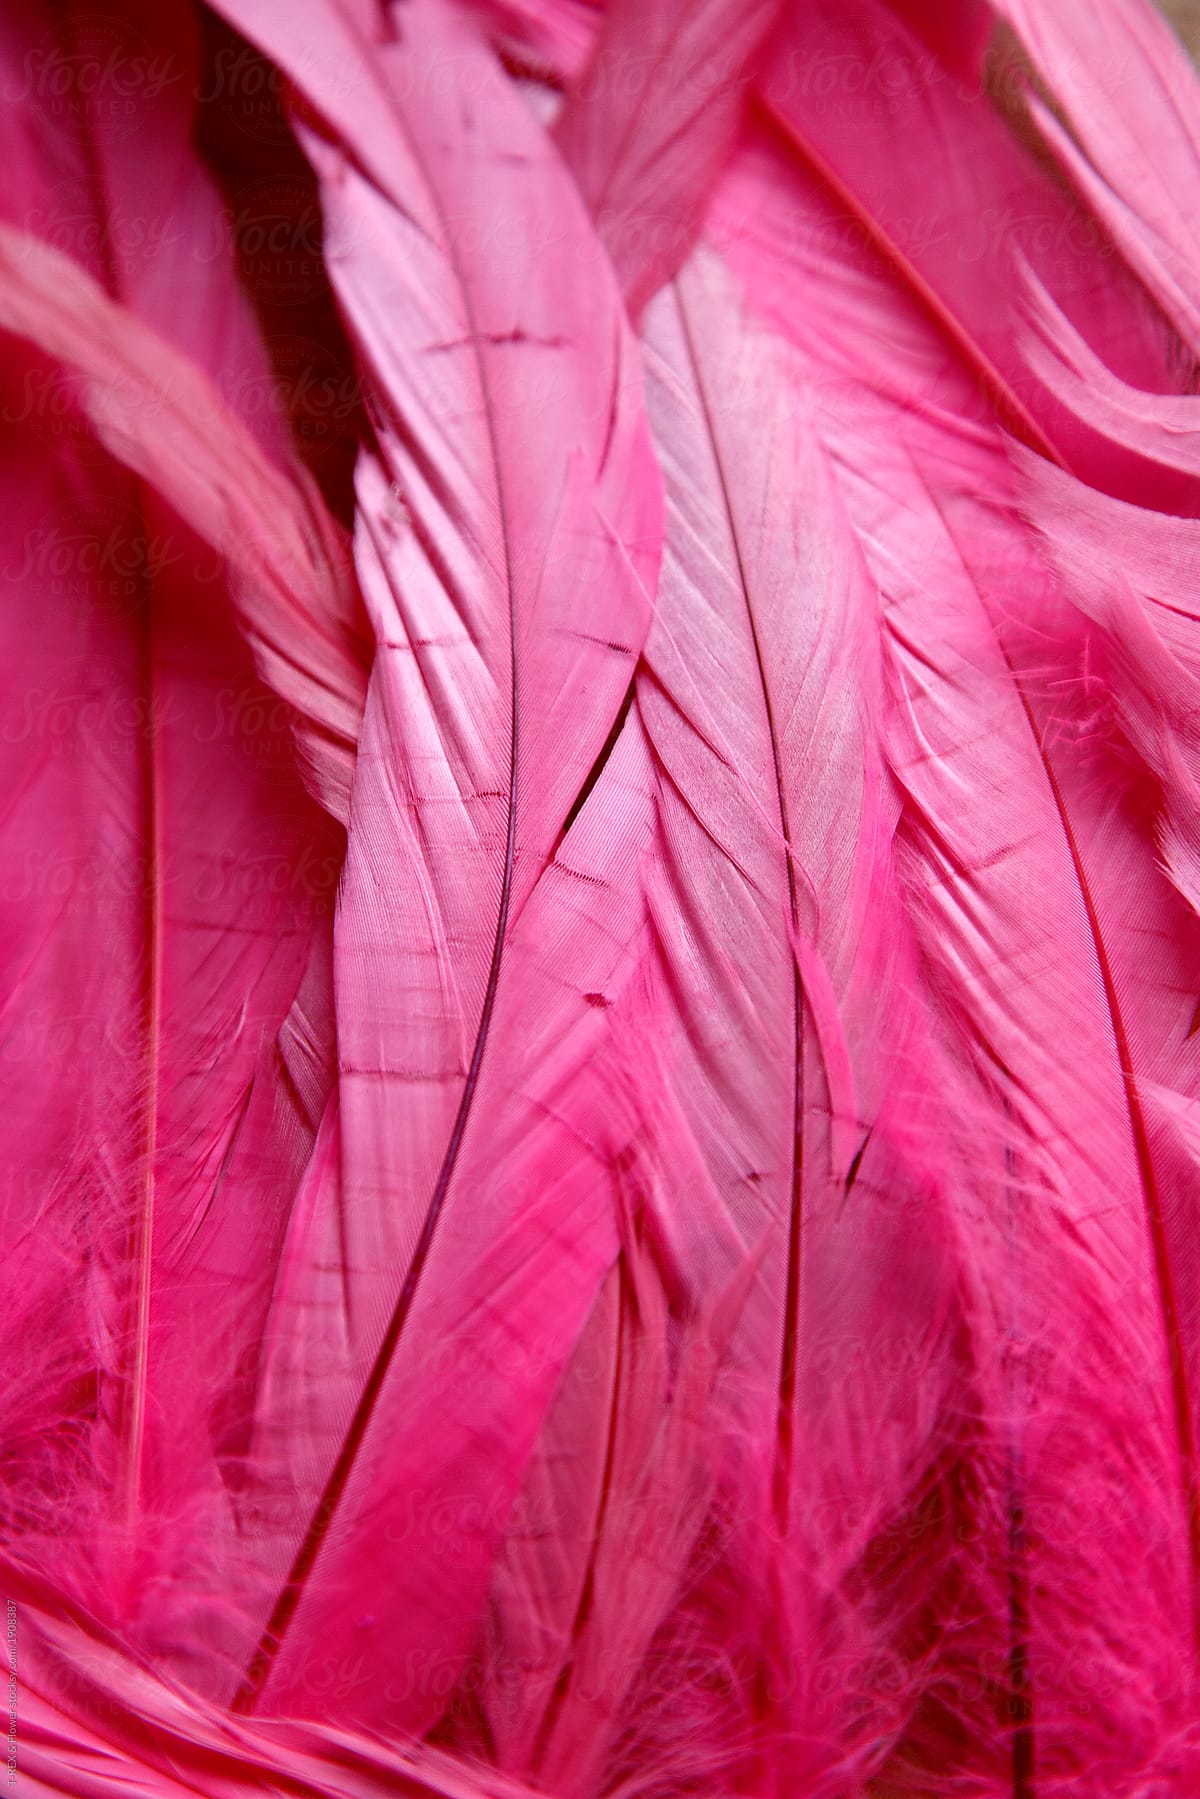 Pink Feathers On White Background by Stocksy Contributor Pixel Stories -  Stocksy